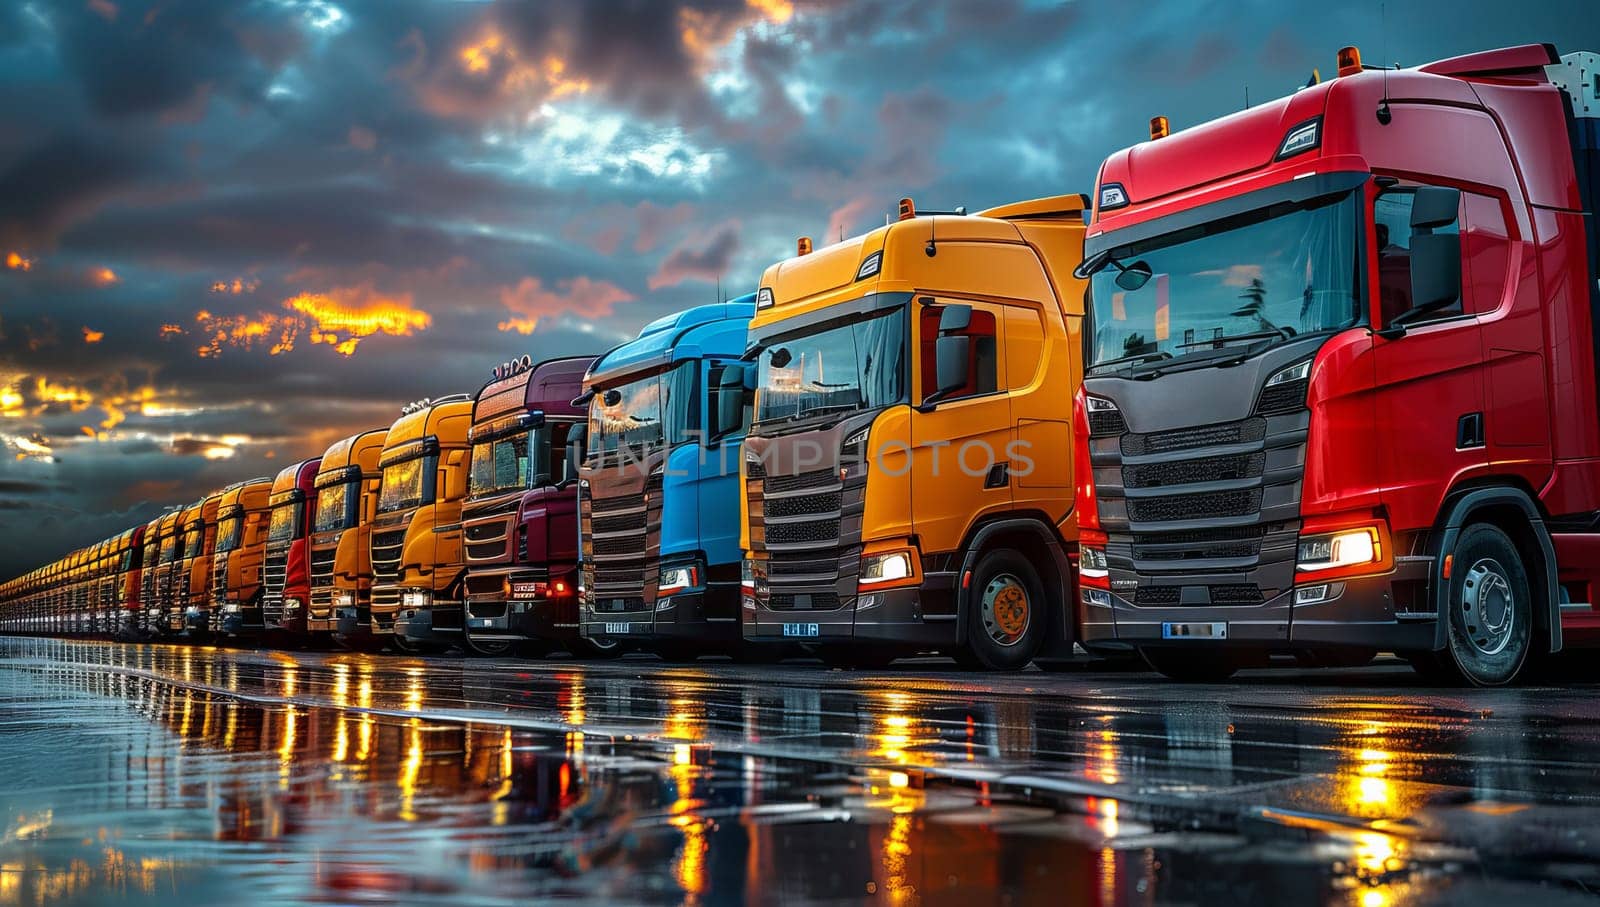 Group of trucks in a row on a wet road at sunset. by ailike